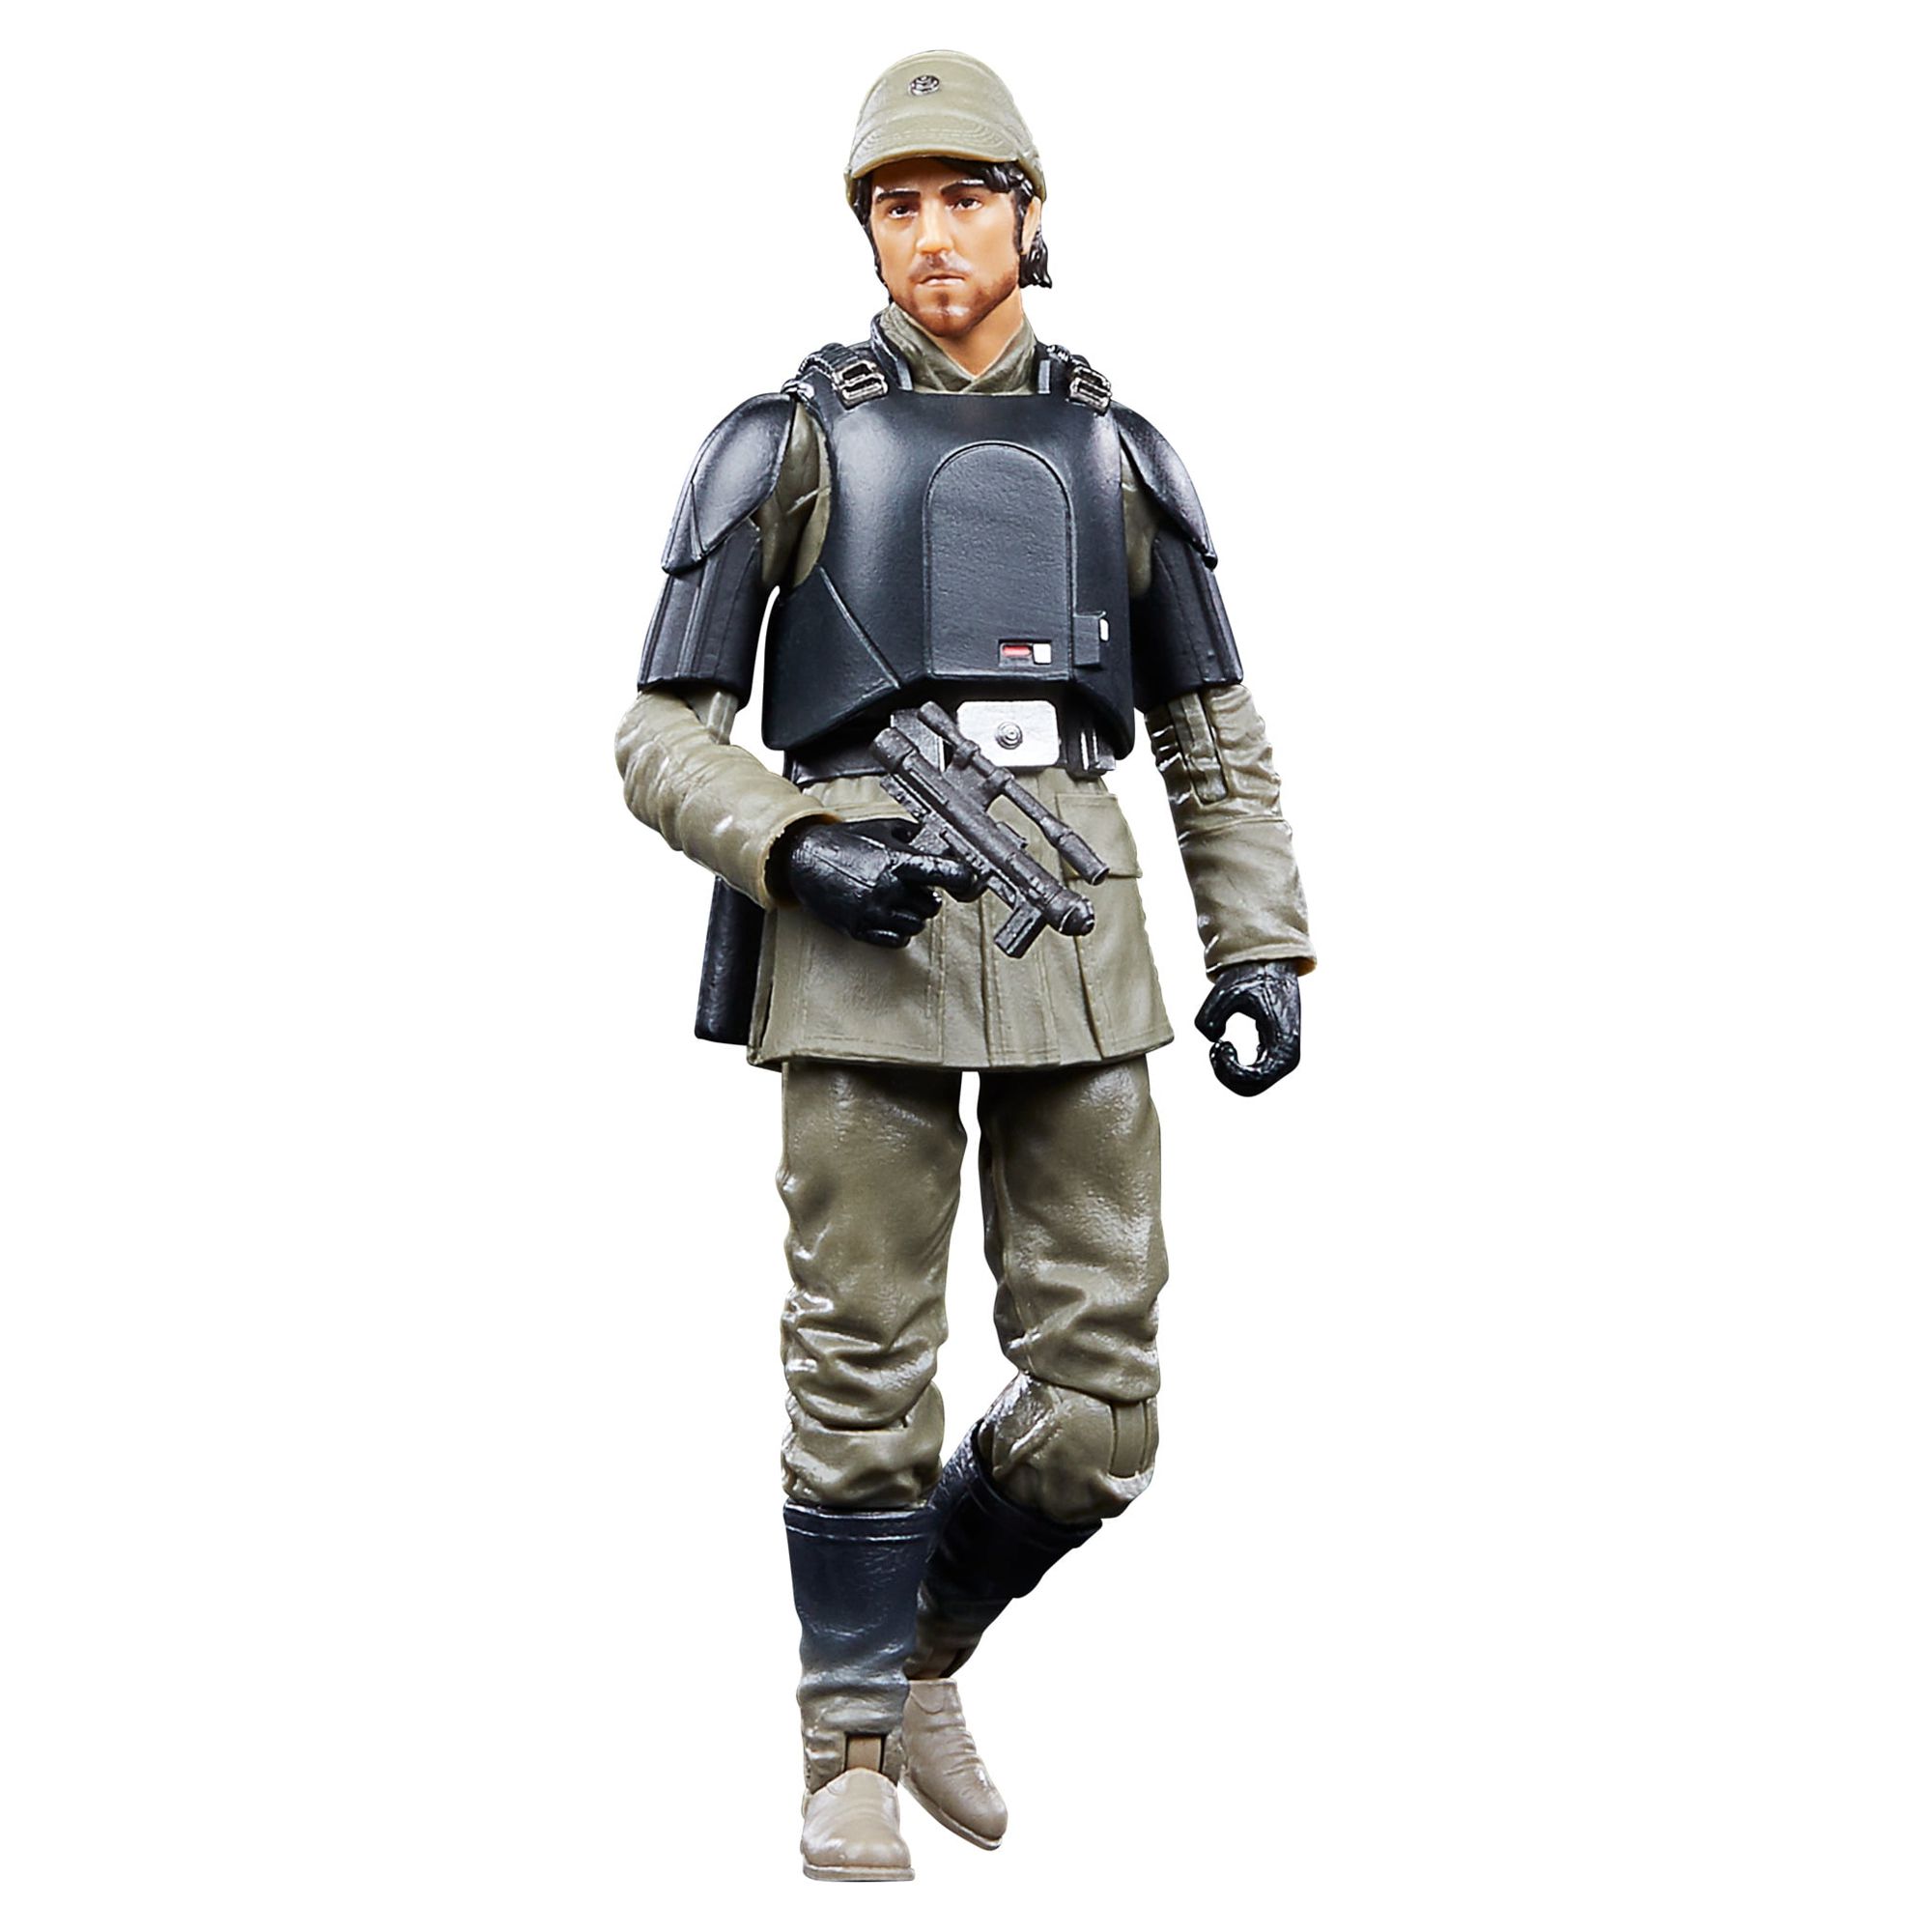 Star Wars: the Black Series Cassian Andor (Aldhani Mission) Kids Toy Action Figure for Boys and Girls Ages 4 5 6 7 8 and Up, Only At Walmart - image 1 of 9